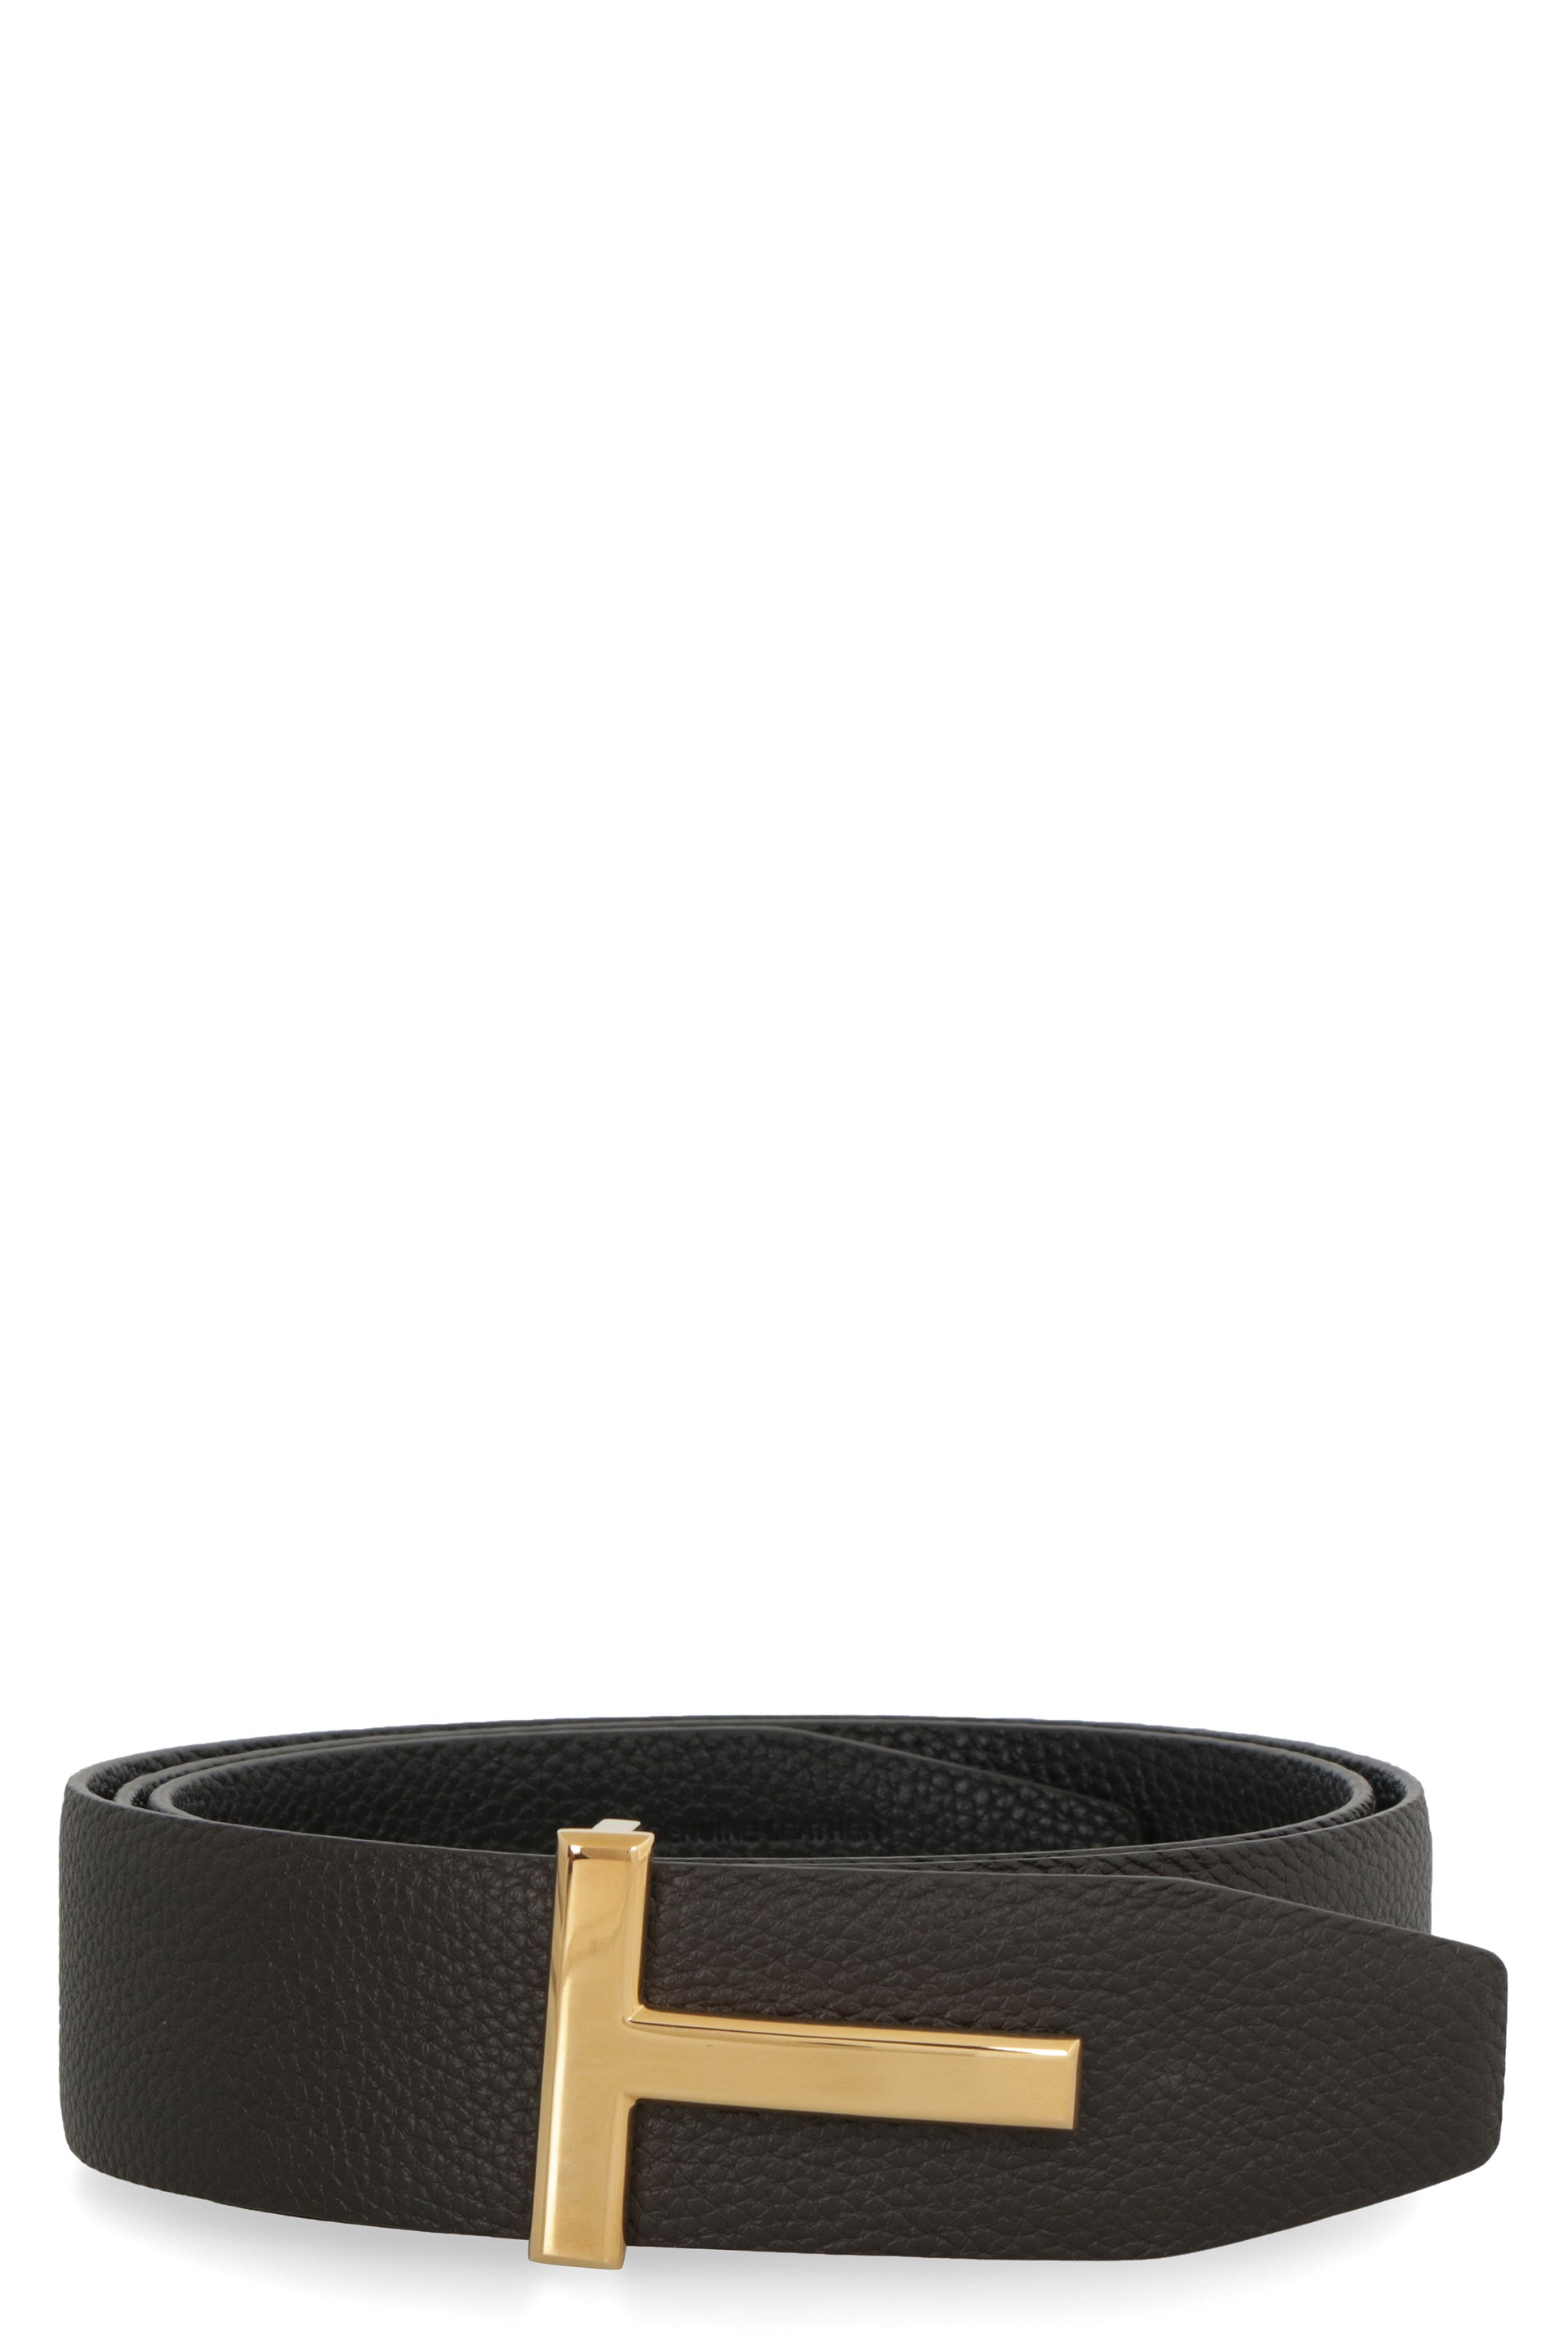 Tom Ford Premium Leather Belt In Brown